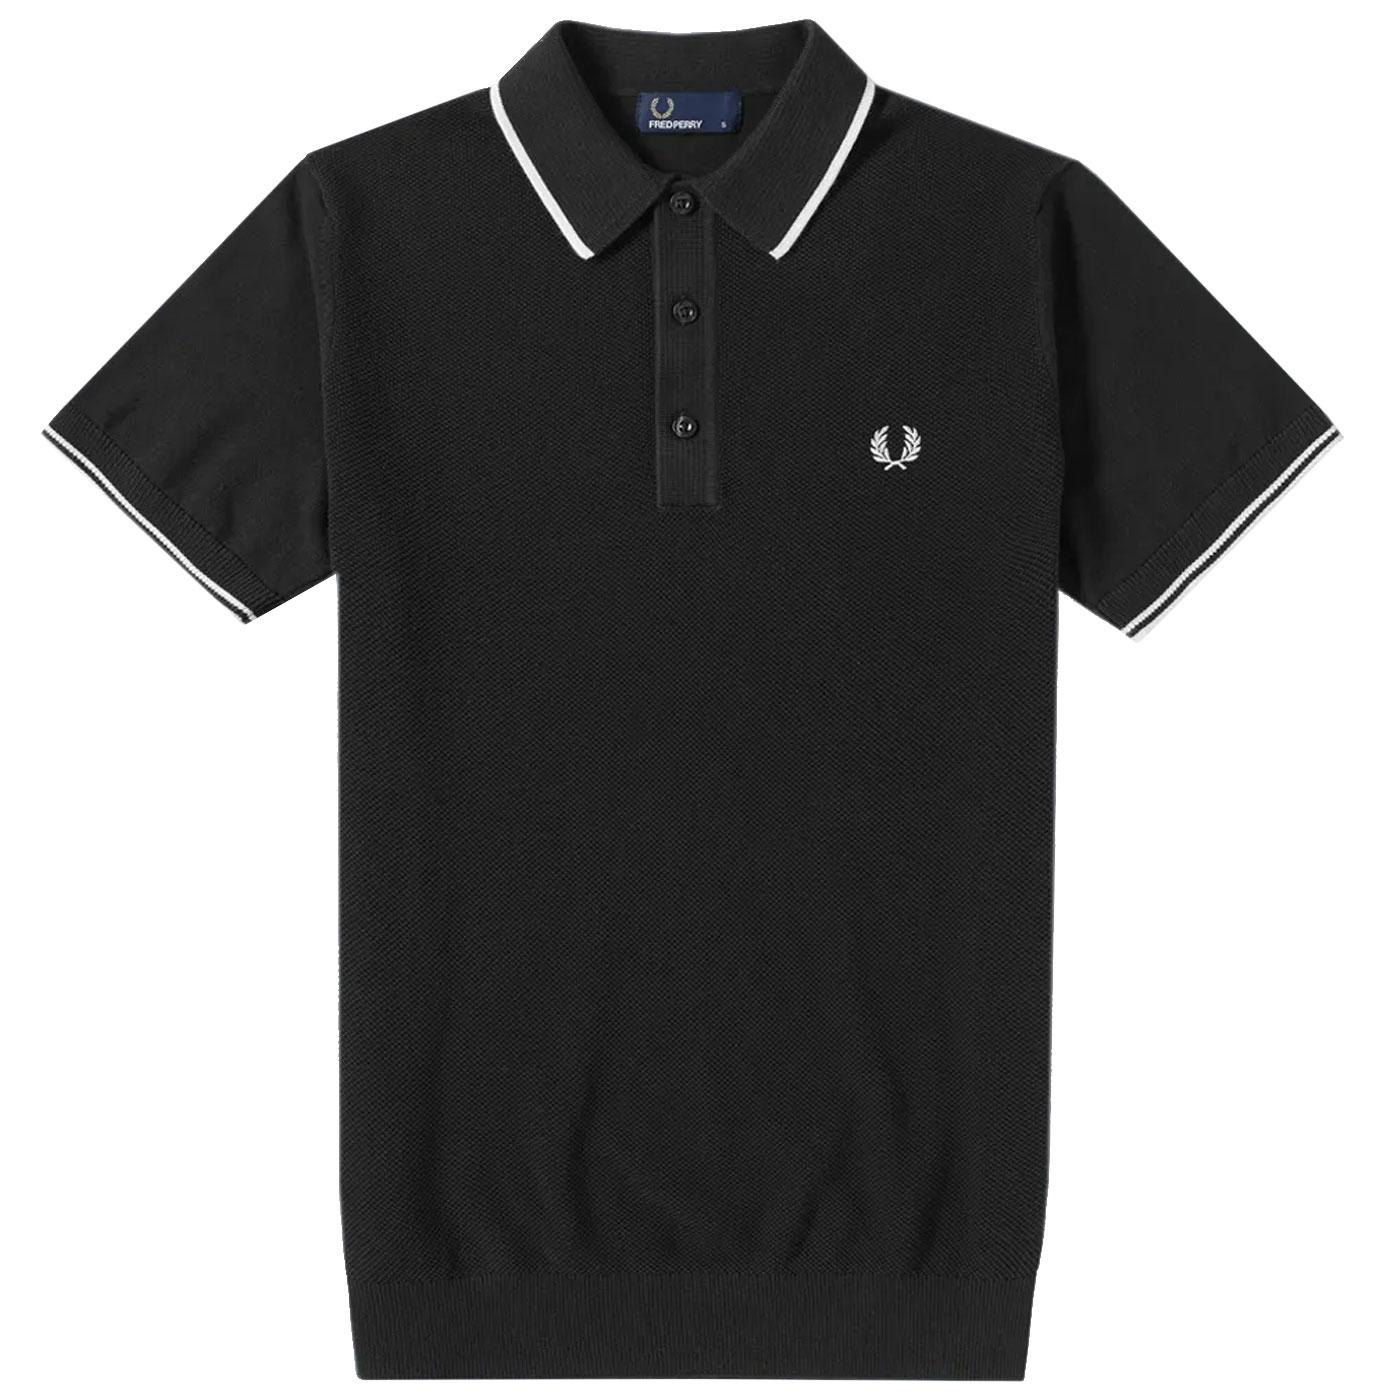 FRED PERRY Men's Mod Tipped Knitted Polo Shirt in Black